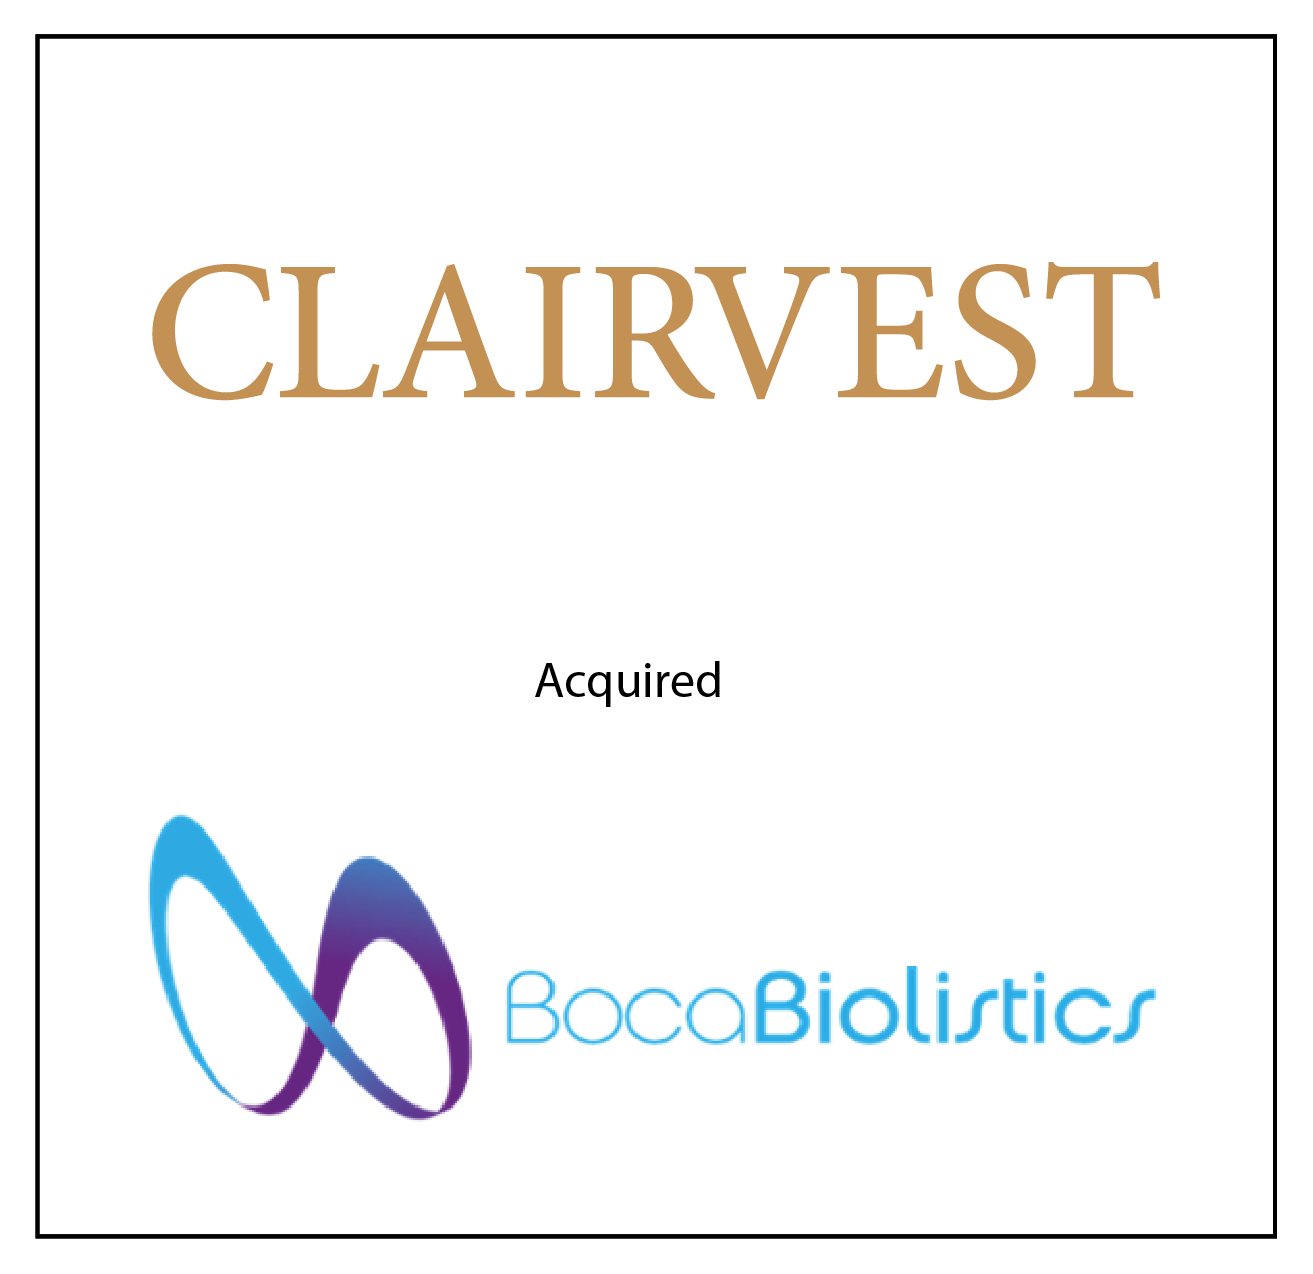 Clairvest Acquires Boca Biolistics to Accelerate Growth of Infectious Disease and Oncological Biobanking Capabilities